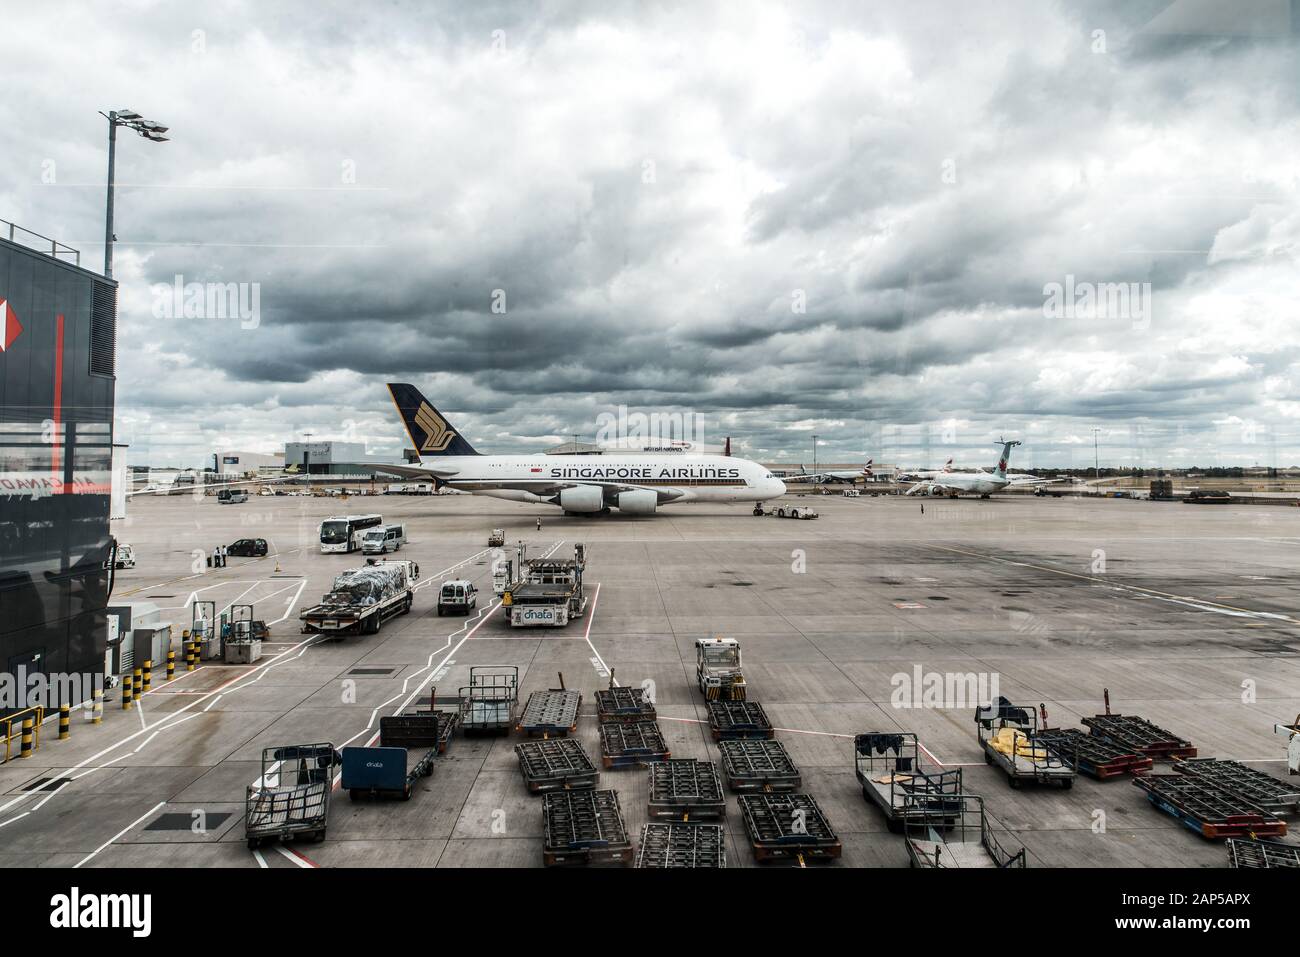 London, Heathrow Airport, Aug 2019: World’s largest commercial aircraft Airbus A380 grounds at airport terminal. Flag carrier of Singapore Airlines Stock Photo